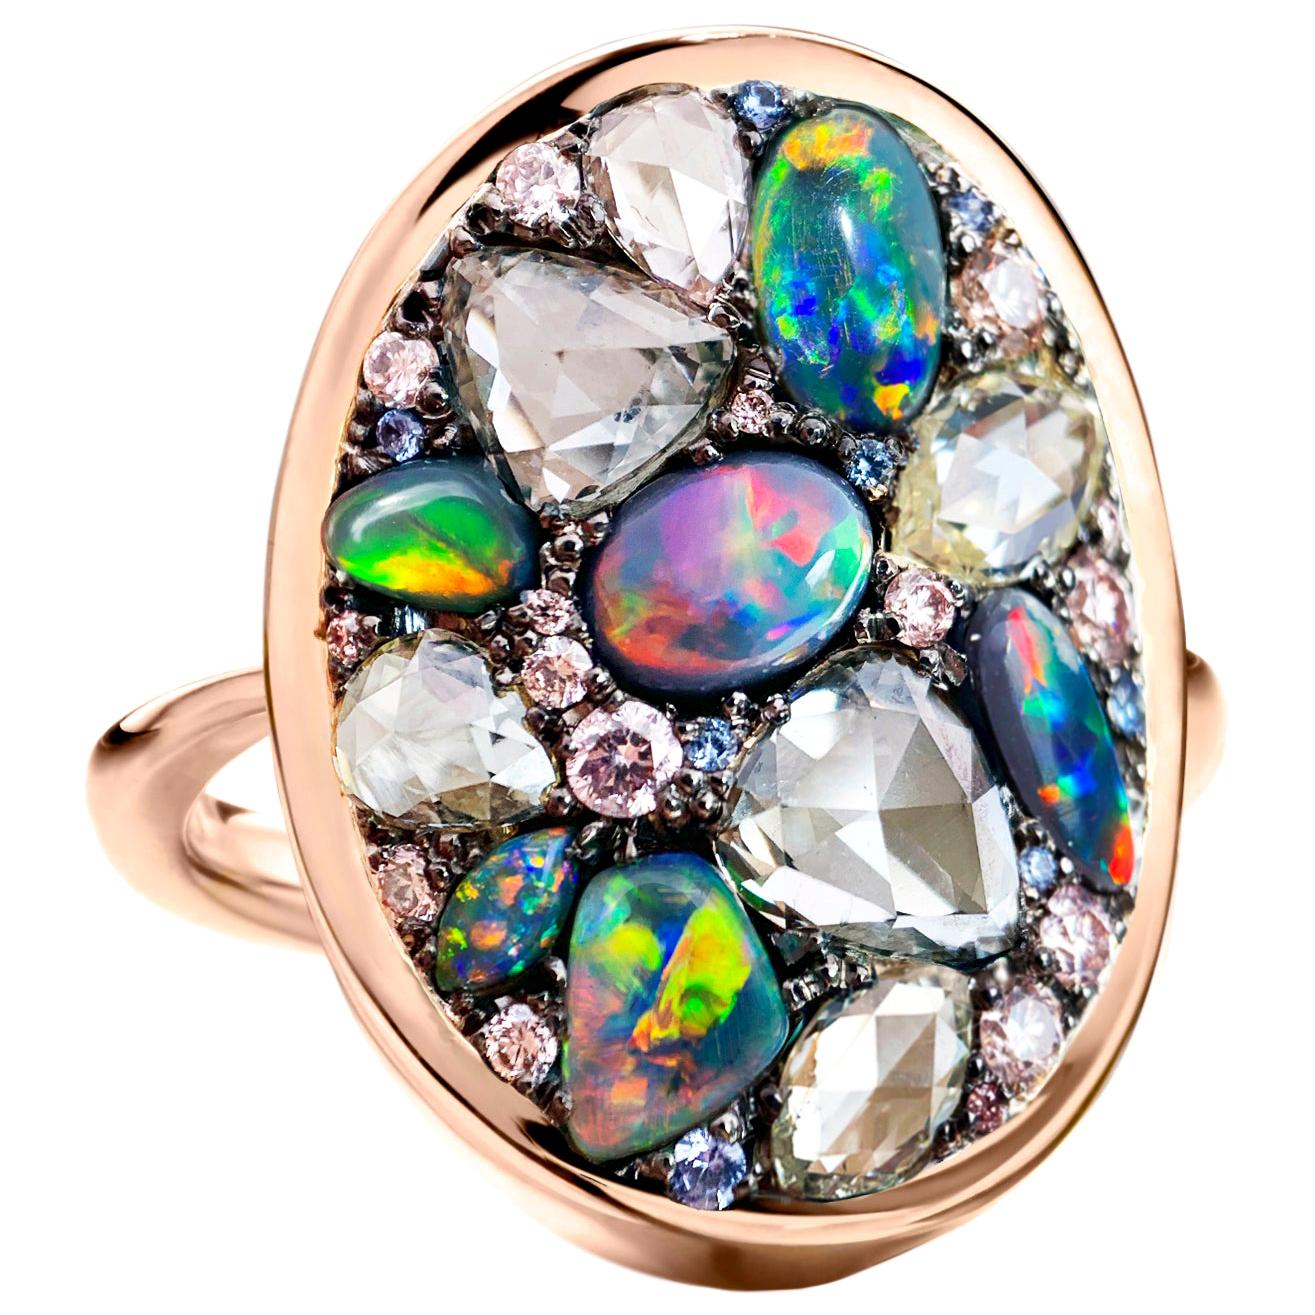 Black Opal, Rose-Cut and Fancy Pink Diamond, Unheated Blue Sapphire Pave Ring